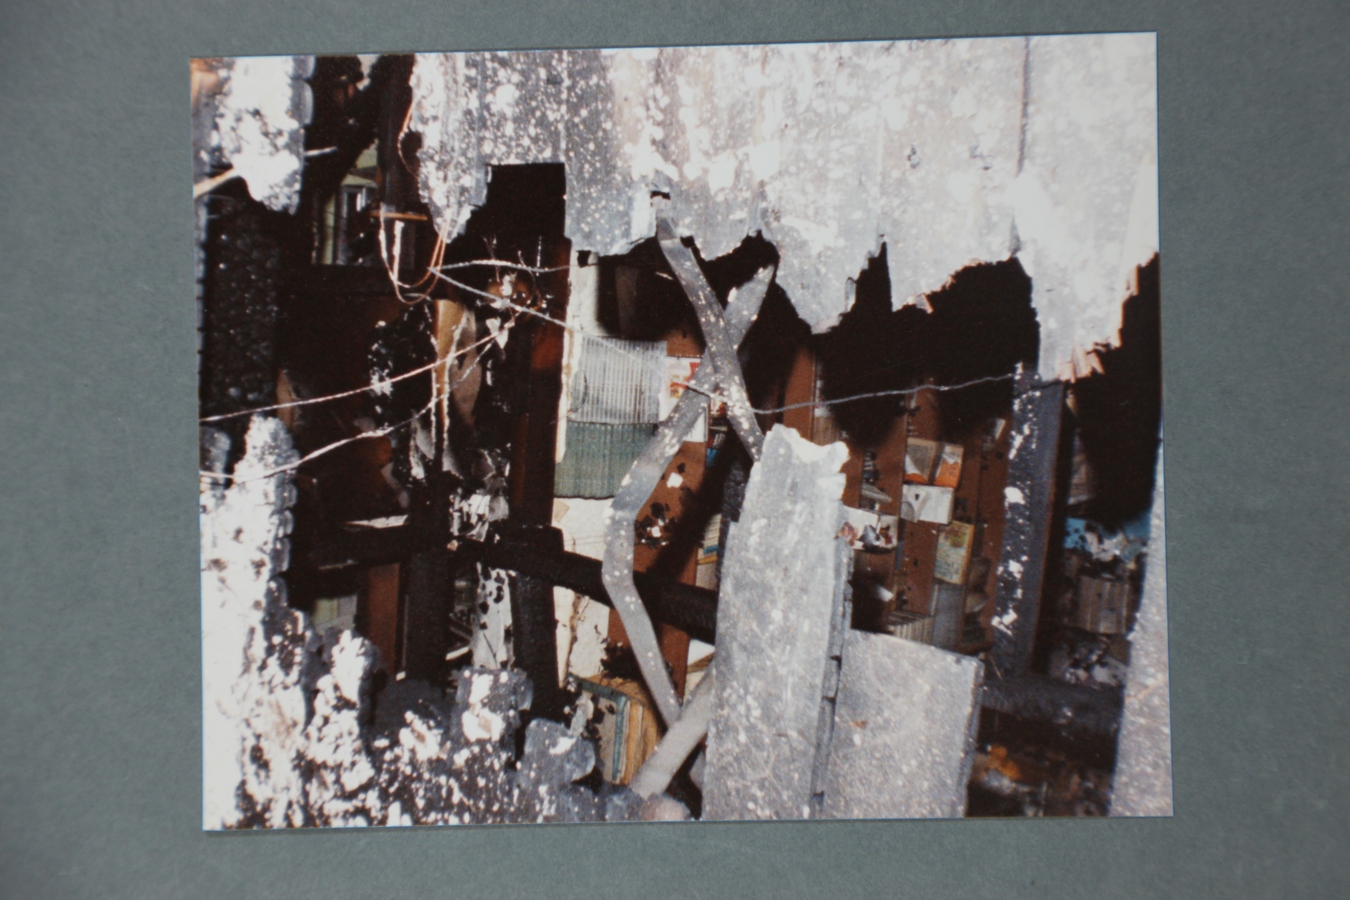 Image: Damage caused by a suspected arson fire at The Dorian, Christchurch, 1986. Courtesy the LAGANZ Archive.